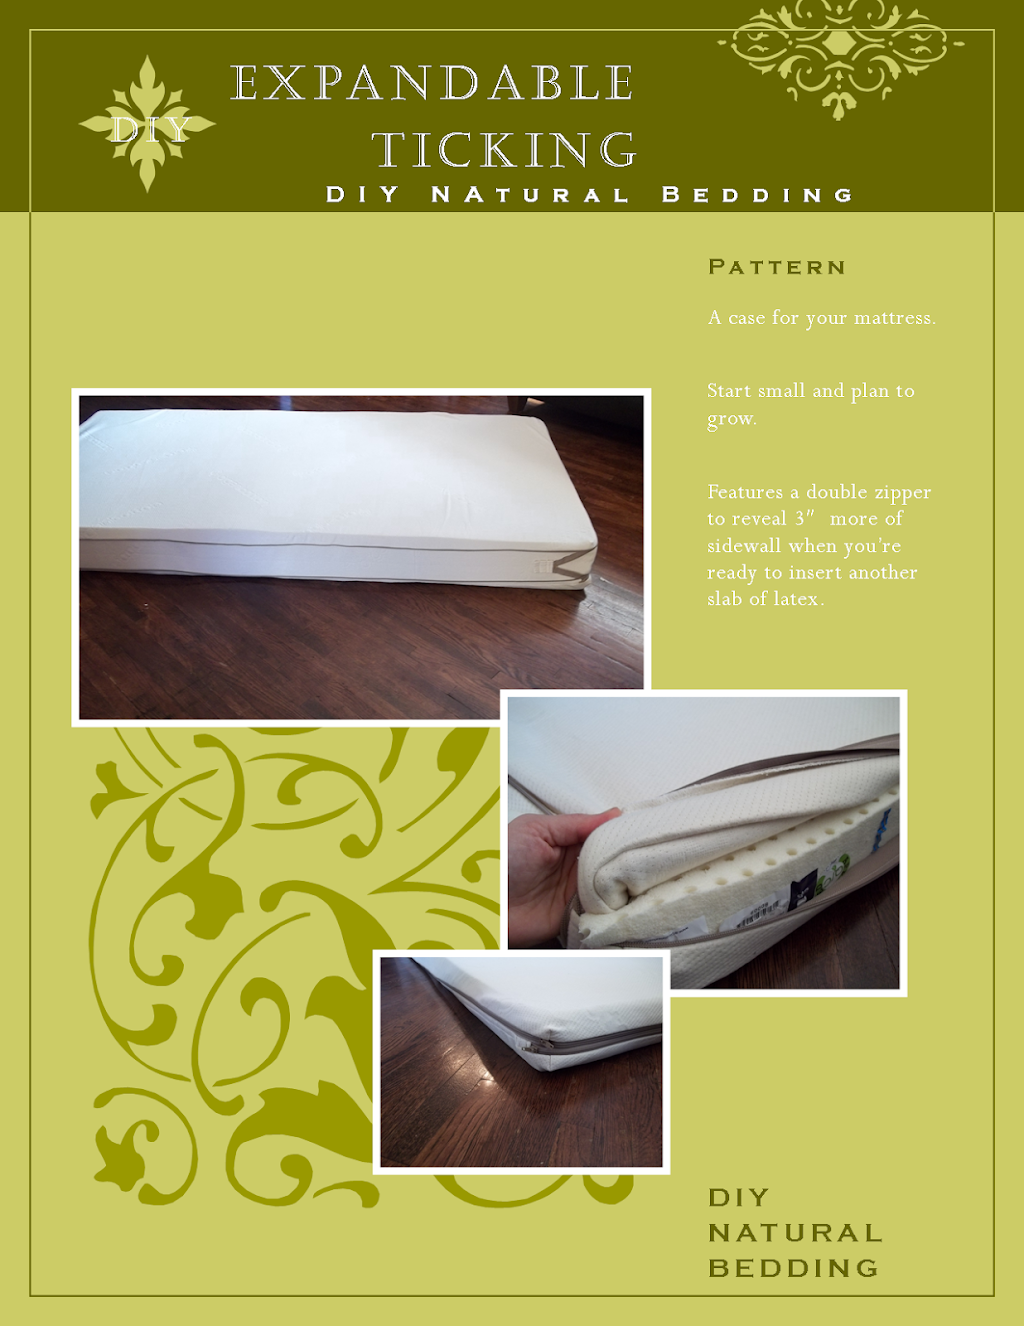 DIY Natural Bedding | Call for appointment or pickup. Drop ins not accepted, 7600 Boone Ave N Suite 80, Brooklyn Park, MN 55428, USA | Phone: (651) 252-4207